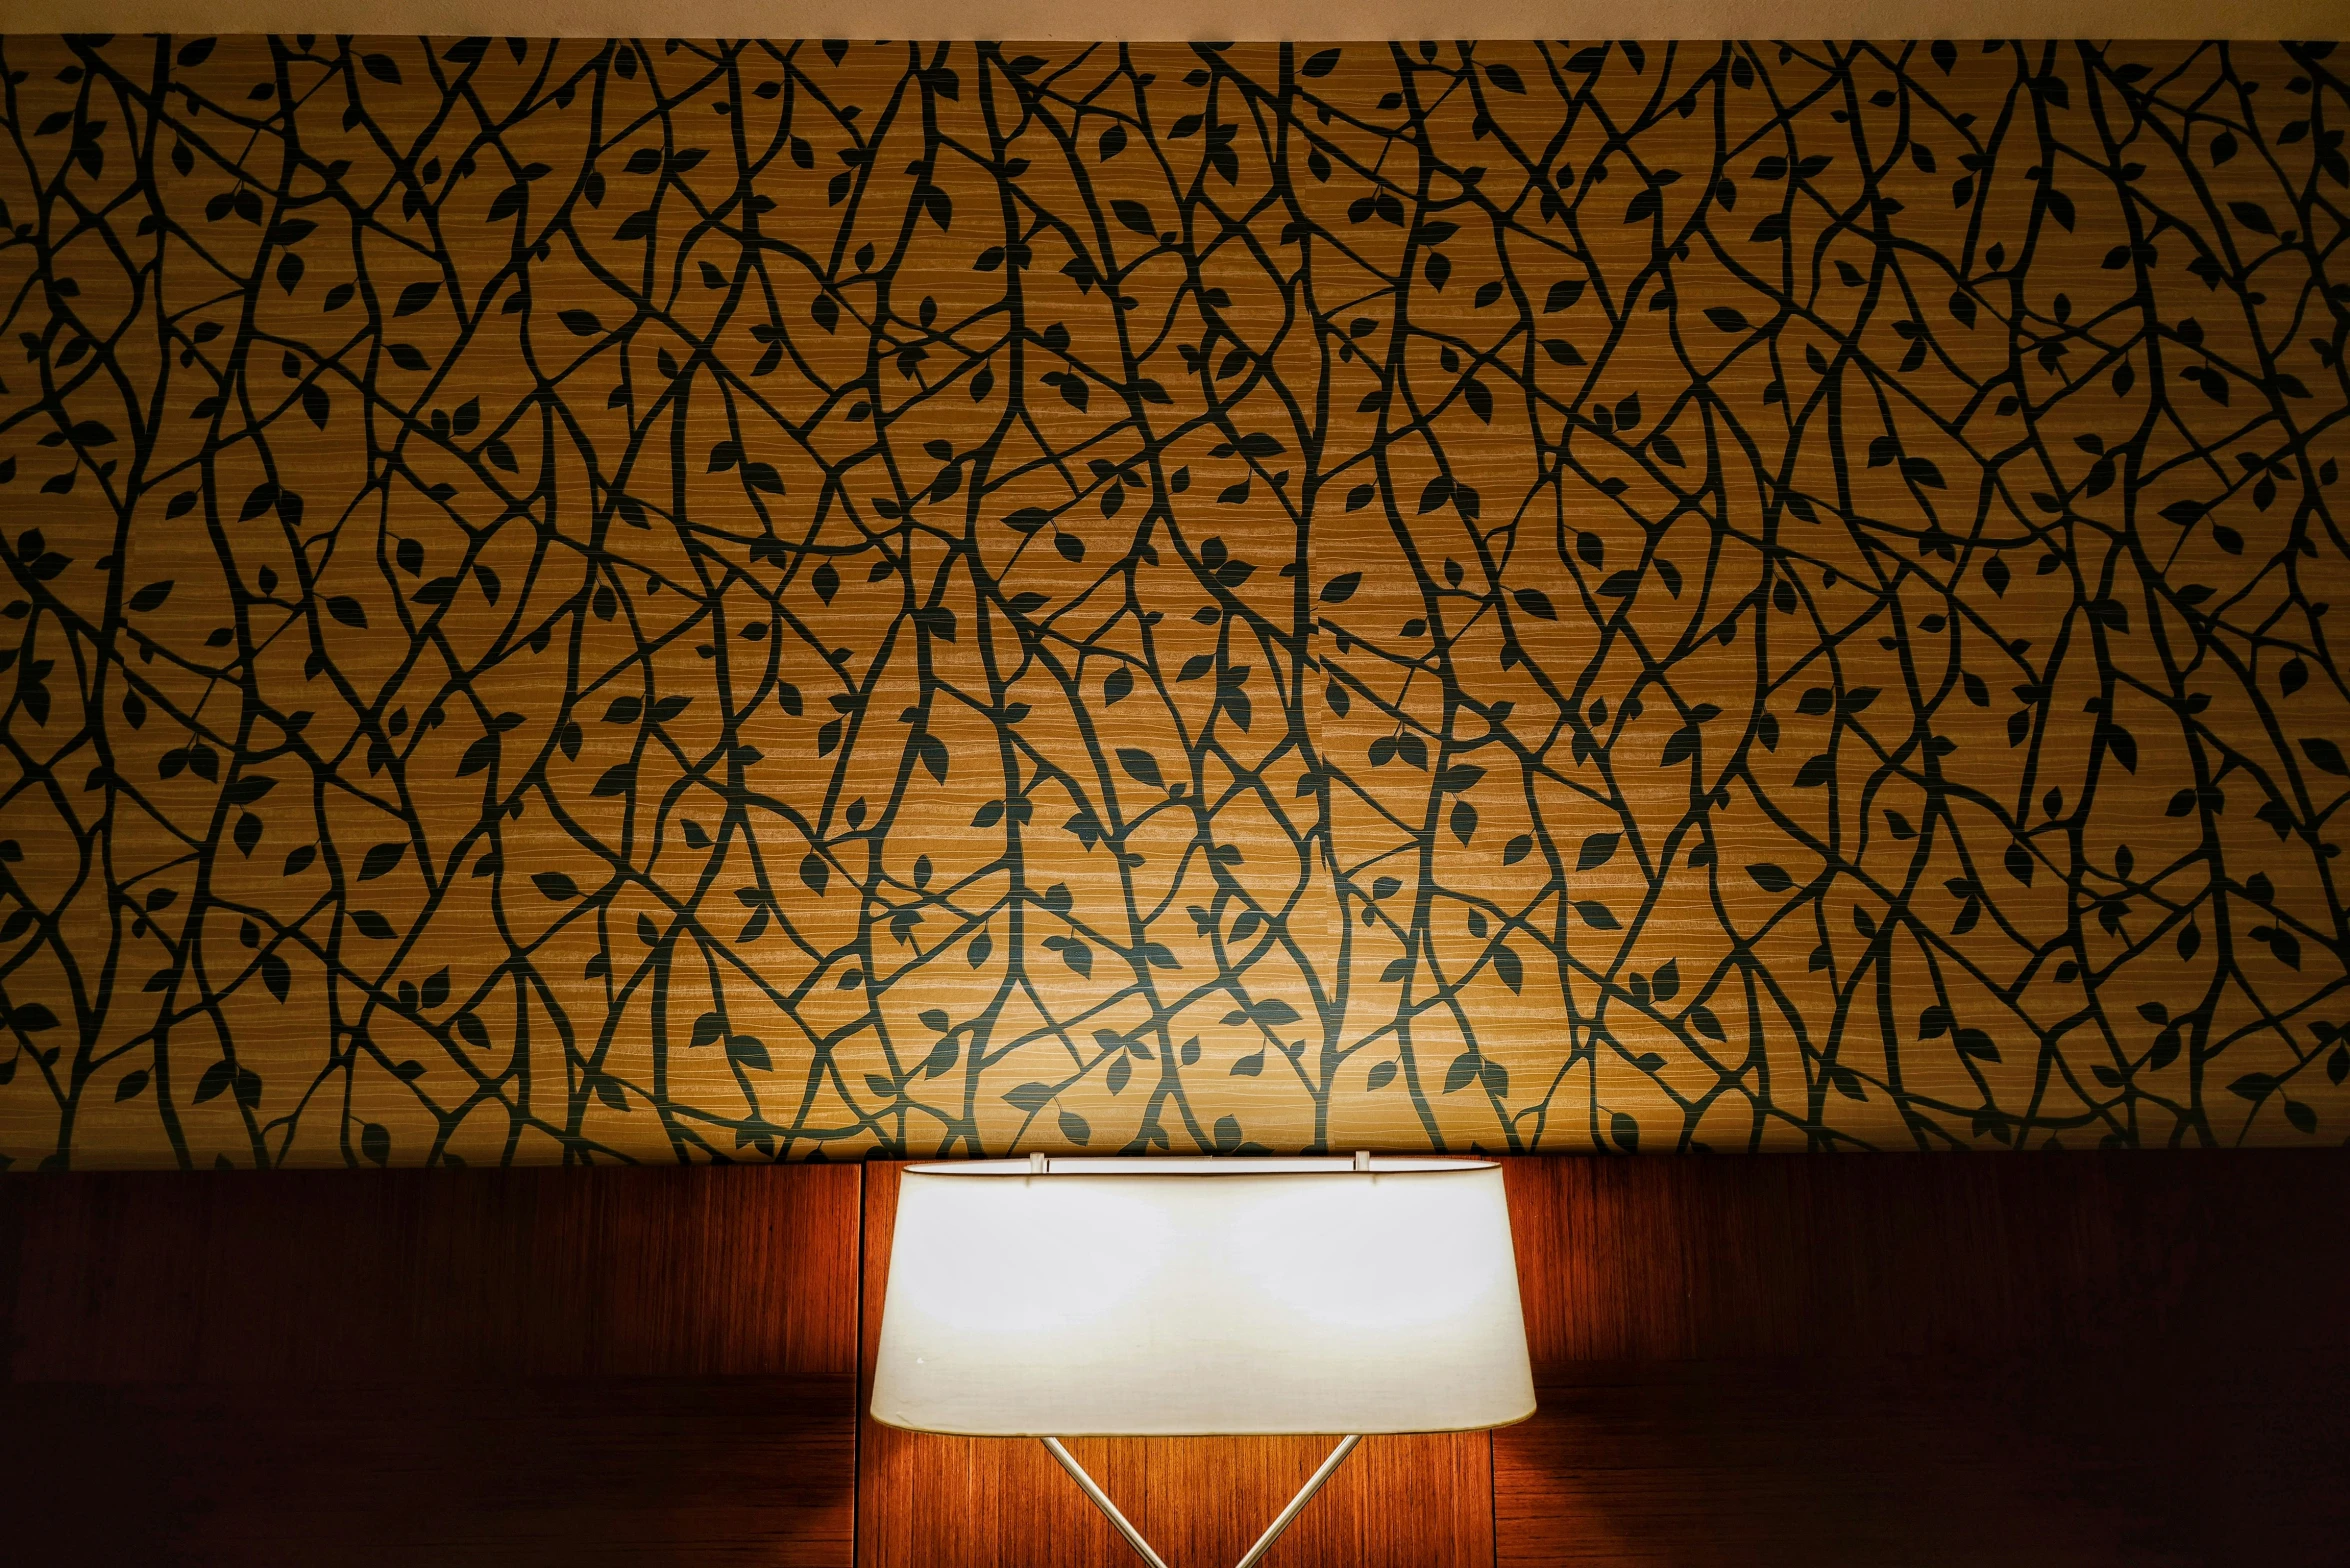 the lamp is next to the wall that has a pattern on it